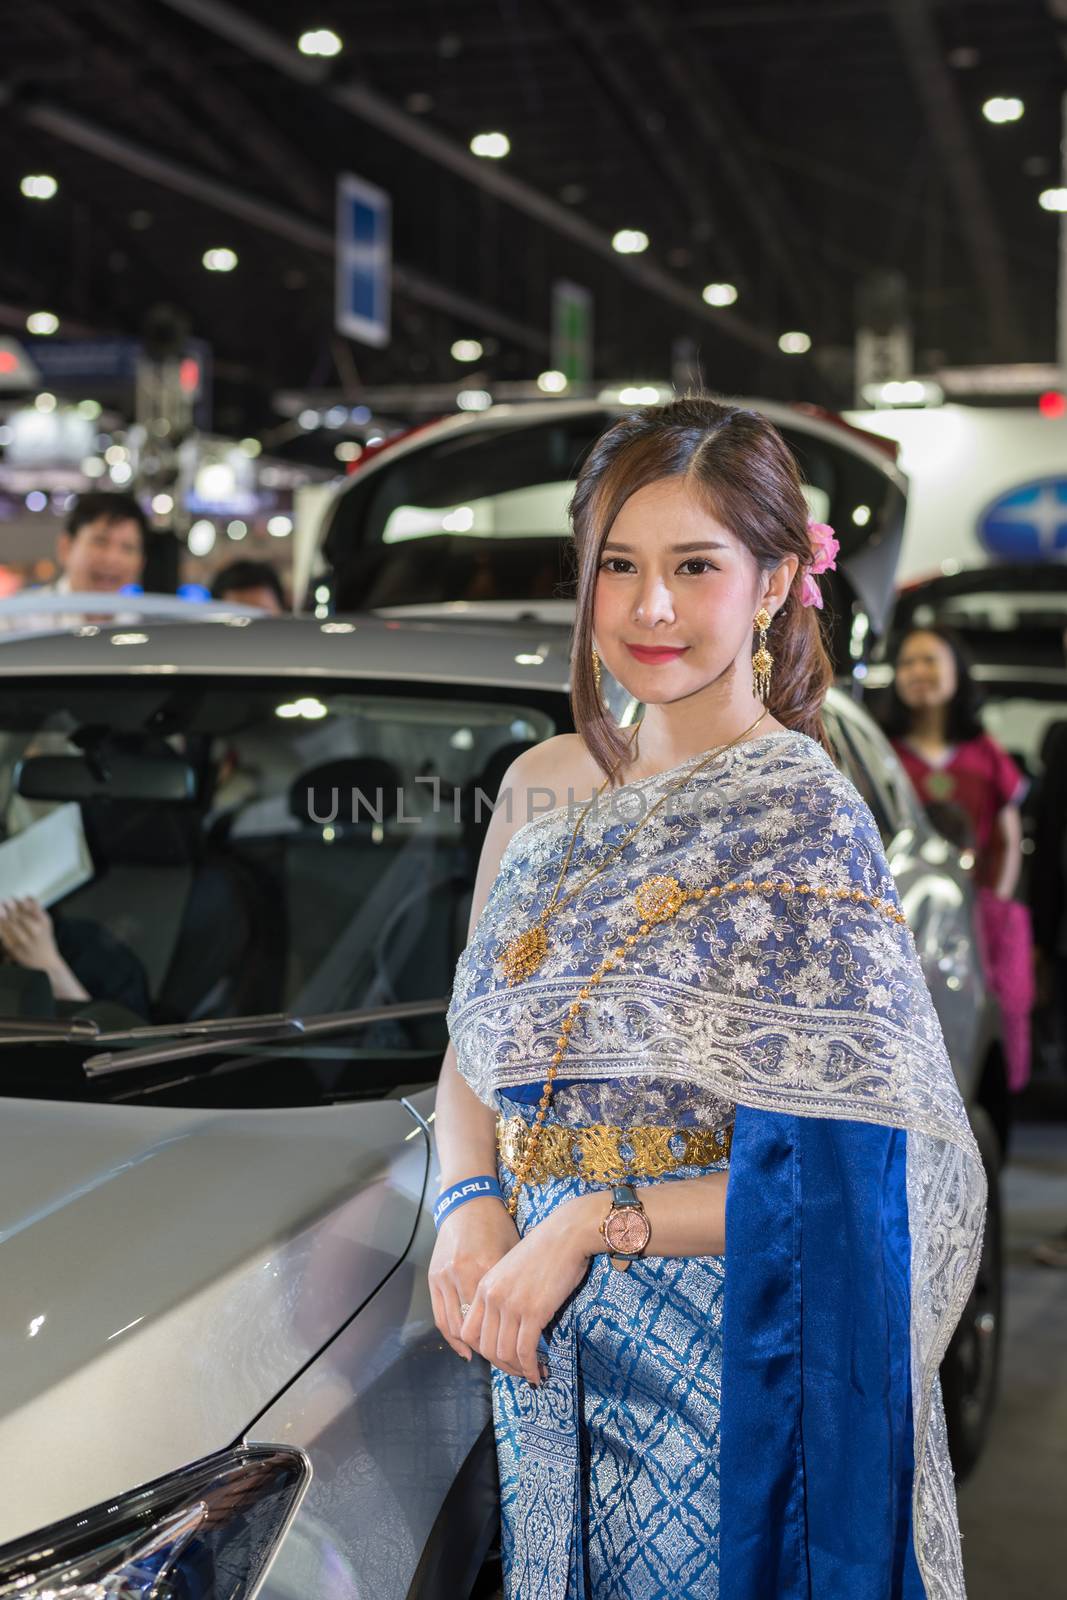 Bangkok, Thailand - March 31, 2018 : Unidentified model pretty lady beauty and sexy on display in car show event. This a open event no need press credentials required.